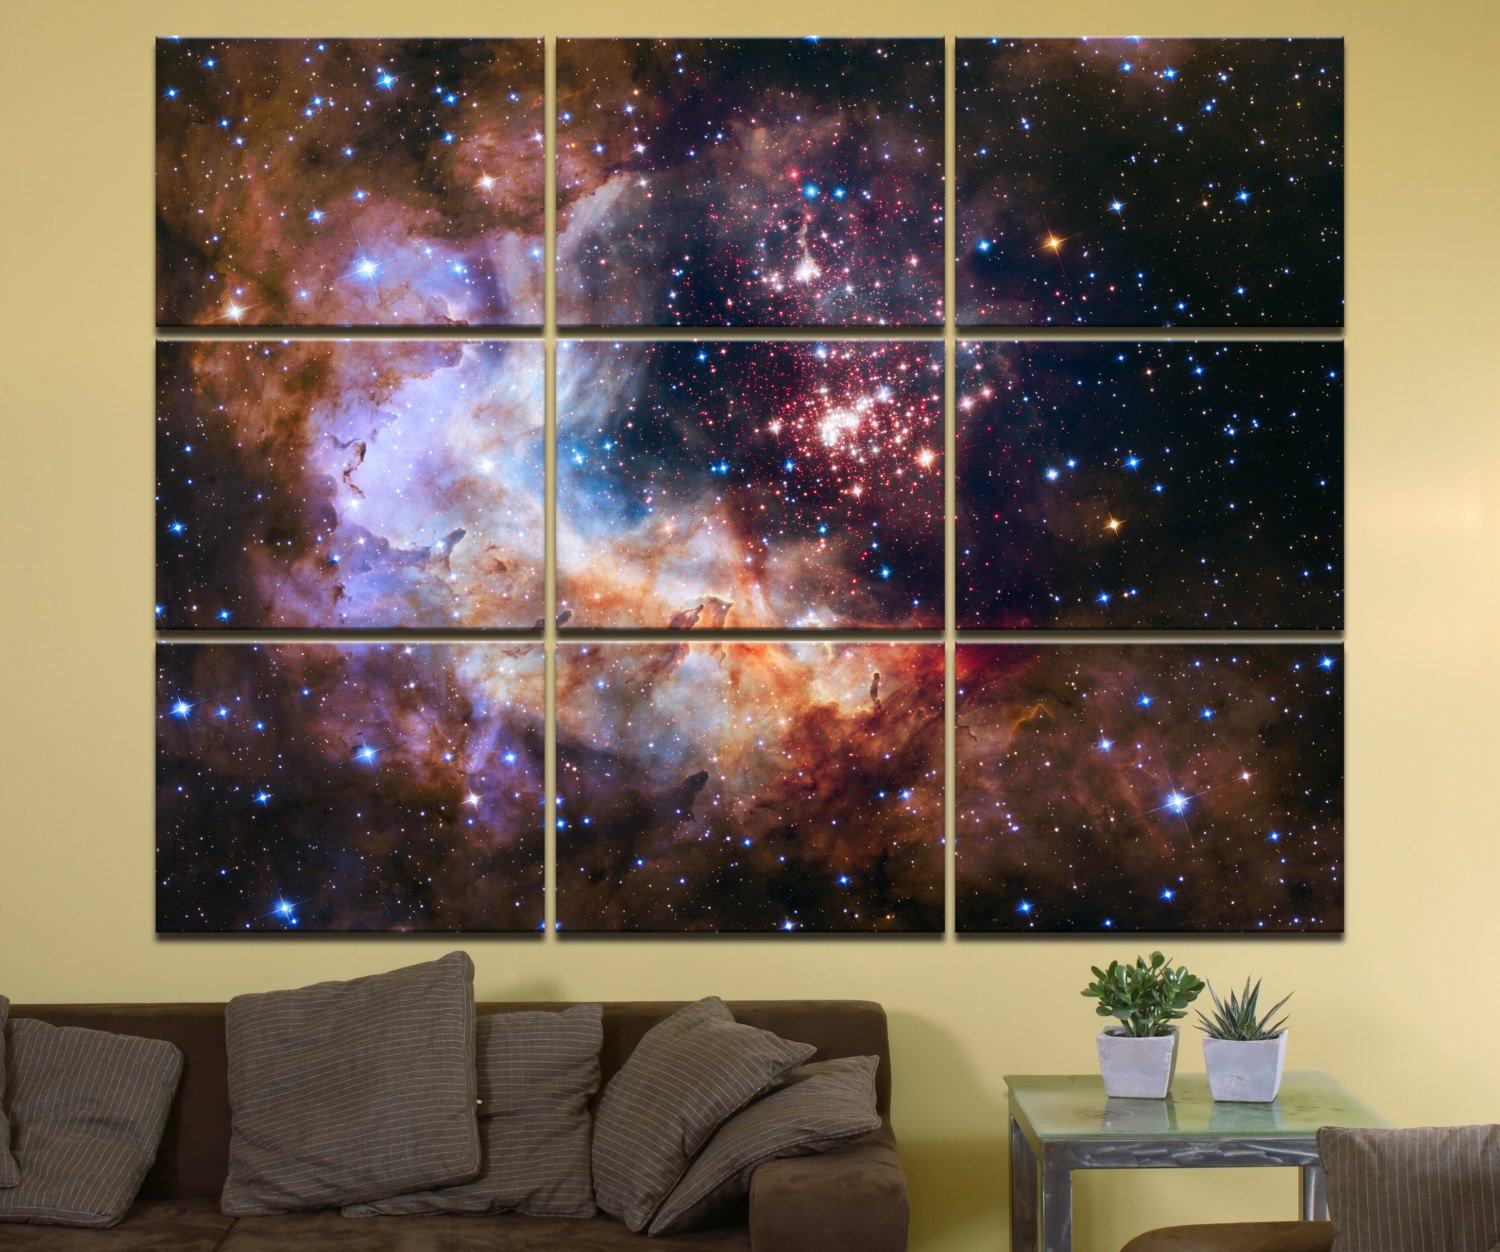 Celestial Fireworks, Hubble 25th Anniversary HD Space Photo - 72" x 54", GIANT 9-Piece Canvas Wall Mural